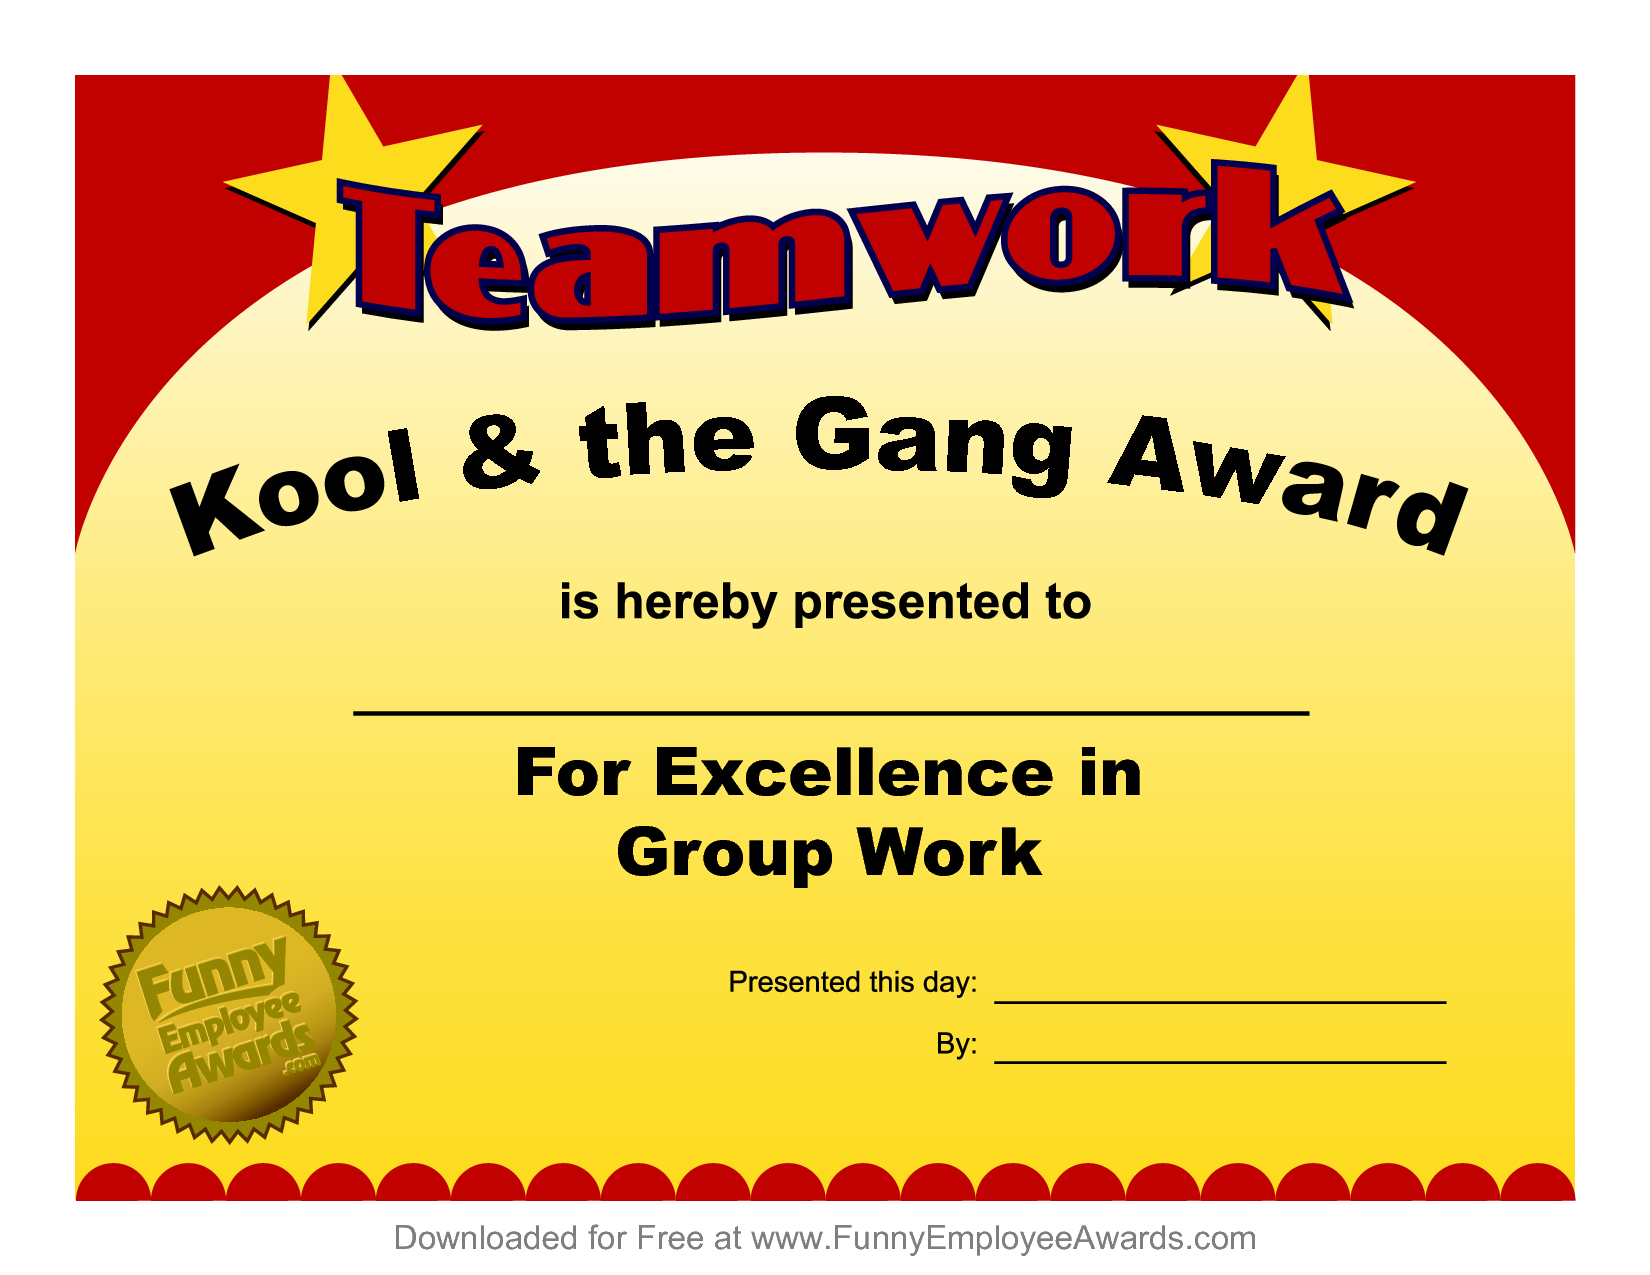 Fun Award Templatefree Employee Award Certificate Templates With Free Printable Funny Certificate Templates